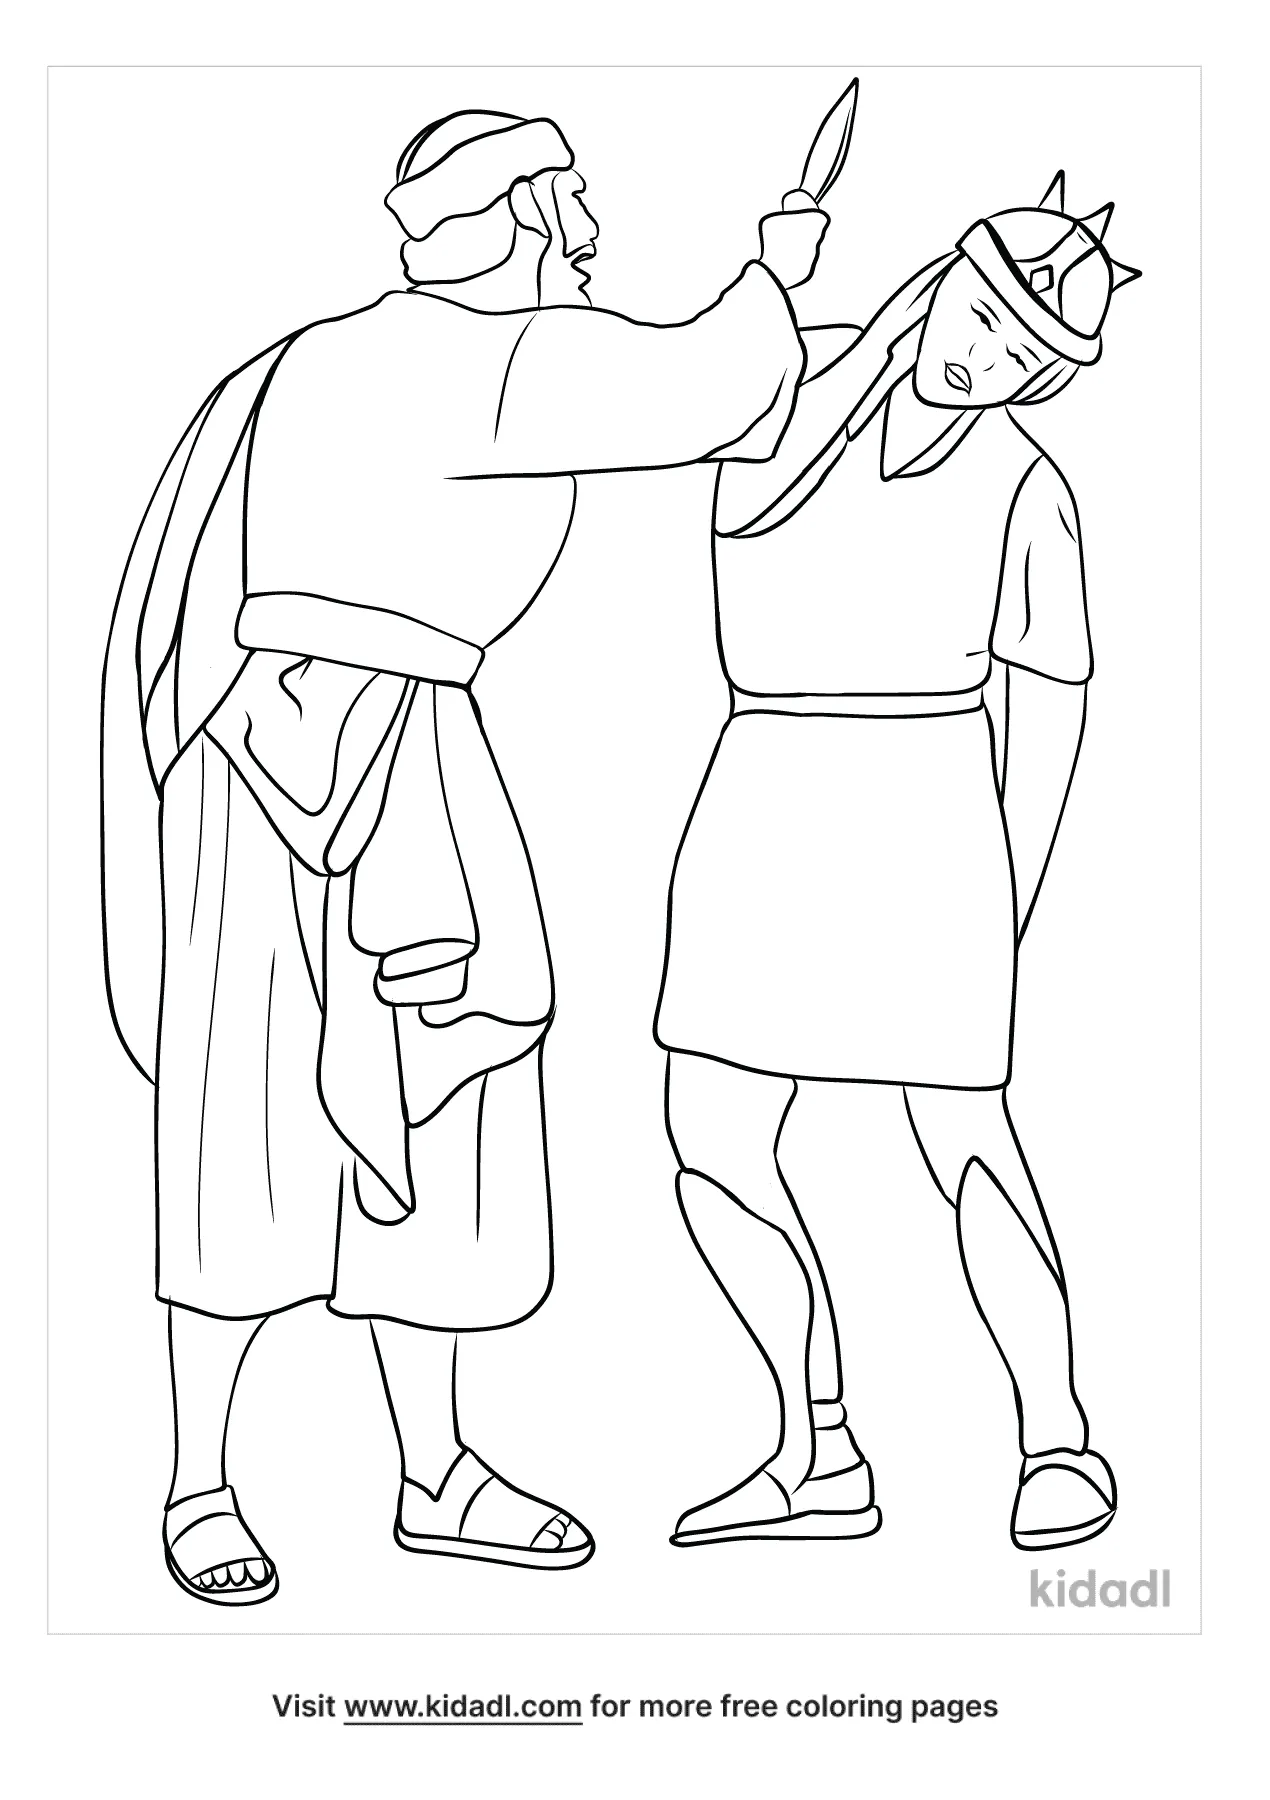 Peter Cuts Off Soldier's Ear Coloring Page | Free Bible Coloring Page ...